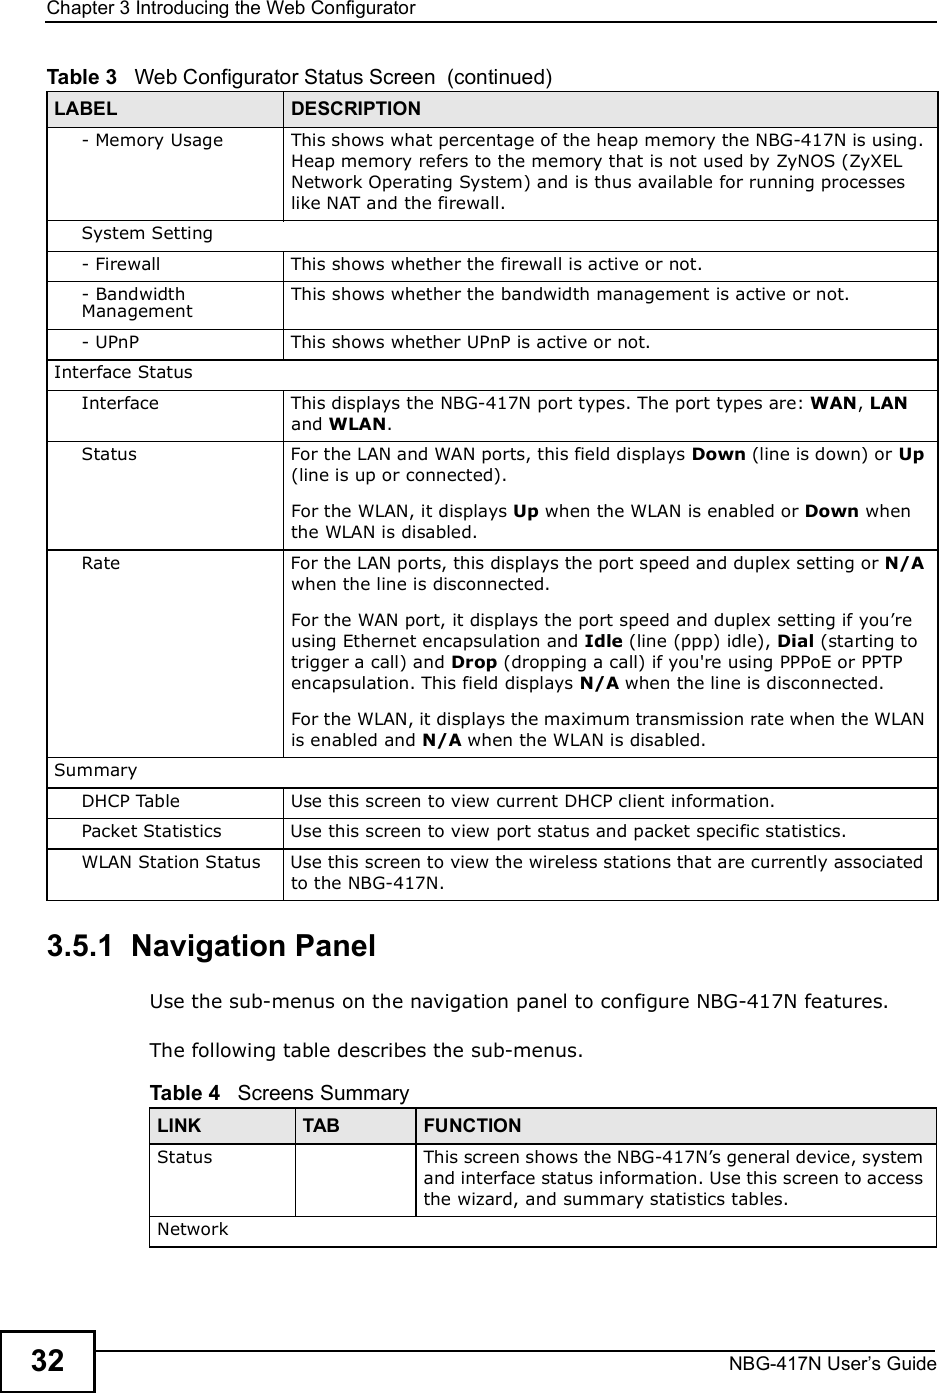 Chapter 3Introducing the Web ConfiguratorNBG-417N User s Guide323.5.1  Navigation PanelUse the sub-menus on the navigation panel to configure NBG-417N features. The following table describes the sub-menus.- Memory UsageThis shows what percentage of the heap memory the NBG-417N is using. Heap memory refers to the memory that is not used by ZyNOS (ZyXEL Network Operating System) and is thus available for running processes like NAT and the firewall. System Setting- FirewallThis shows whether the firewall is active or not.- Bandwidth ManagementThis shows whether the bandwidth management is active or not.- UPnPThis shows whether UPnP is active or not.Interface StatusInterfaceThis displays the NBG-417N port types. The port types are: WAN, LAN and WLAN.StatusFor the LAN and WAN ports, this field displays Down (line is down) or Up (line is up or connected).For the WLAN, it displays Up when the WLAN is enabled or Down when the WLAN is disabled.RateFor the LAN ports, this displays the port speed and duplex setting or N/A when the line is disconnected.For the WAN port, it displays the port speed and duplex setting if you!re using Ethernet encapsulation and Idle (line (ppp) idle), Dial (starting to trigger a call) and Drop (dropping a call) if you&apos;re using PPPoE or PPTP encapsulation. This field displays N/A when the line is disconnected.For the WLAN, it displays the maximum transmission rate when the WLAN is enabled and N/A when the WLAN is disabled.SummaryDHCP TableUse this screen to view current DHCP client information.Packet StatisticsUse this screen to view port status and packet specific statistics.WLAN Station StatusUse this screen to view the wireless stations that are currently associated to the NBG-417N.Table 3   Web Configurator Status Screen  (continued) LABEL DESCRIPTIONTable 4   Screens SummaryLINK TAB FUNCTIONStatus This screen shows the NBG-417N!s general device, system and interface status information. Use this screen to access the wizard, and summary statistics tables.Network